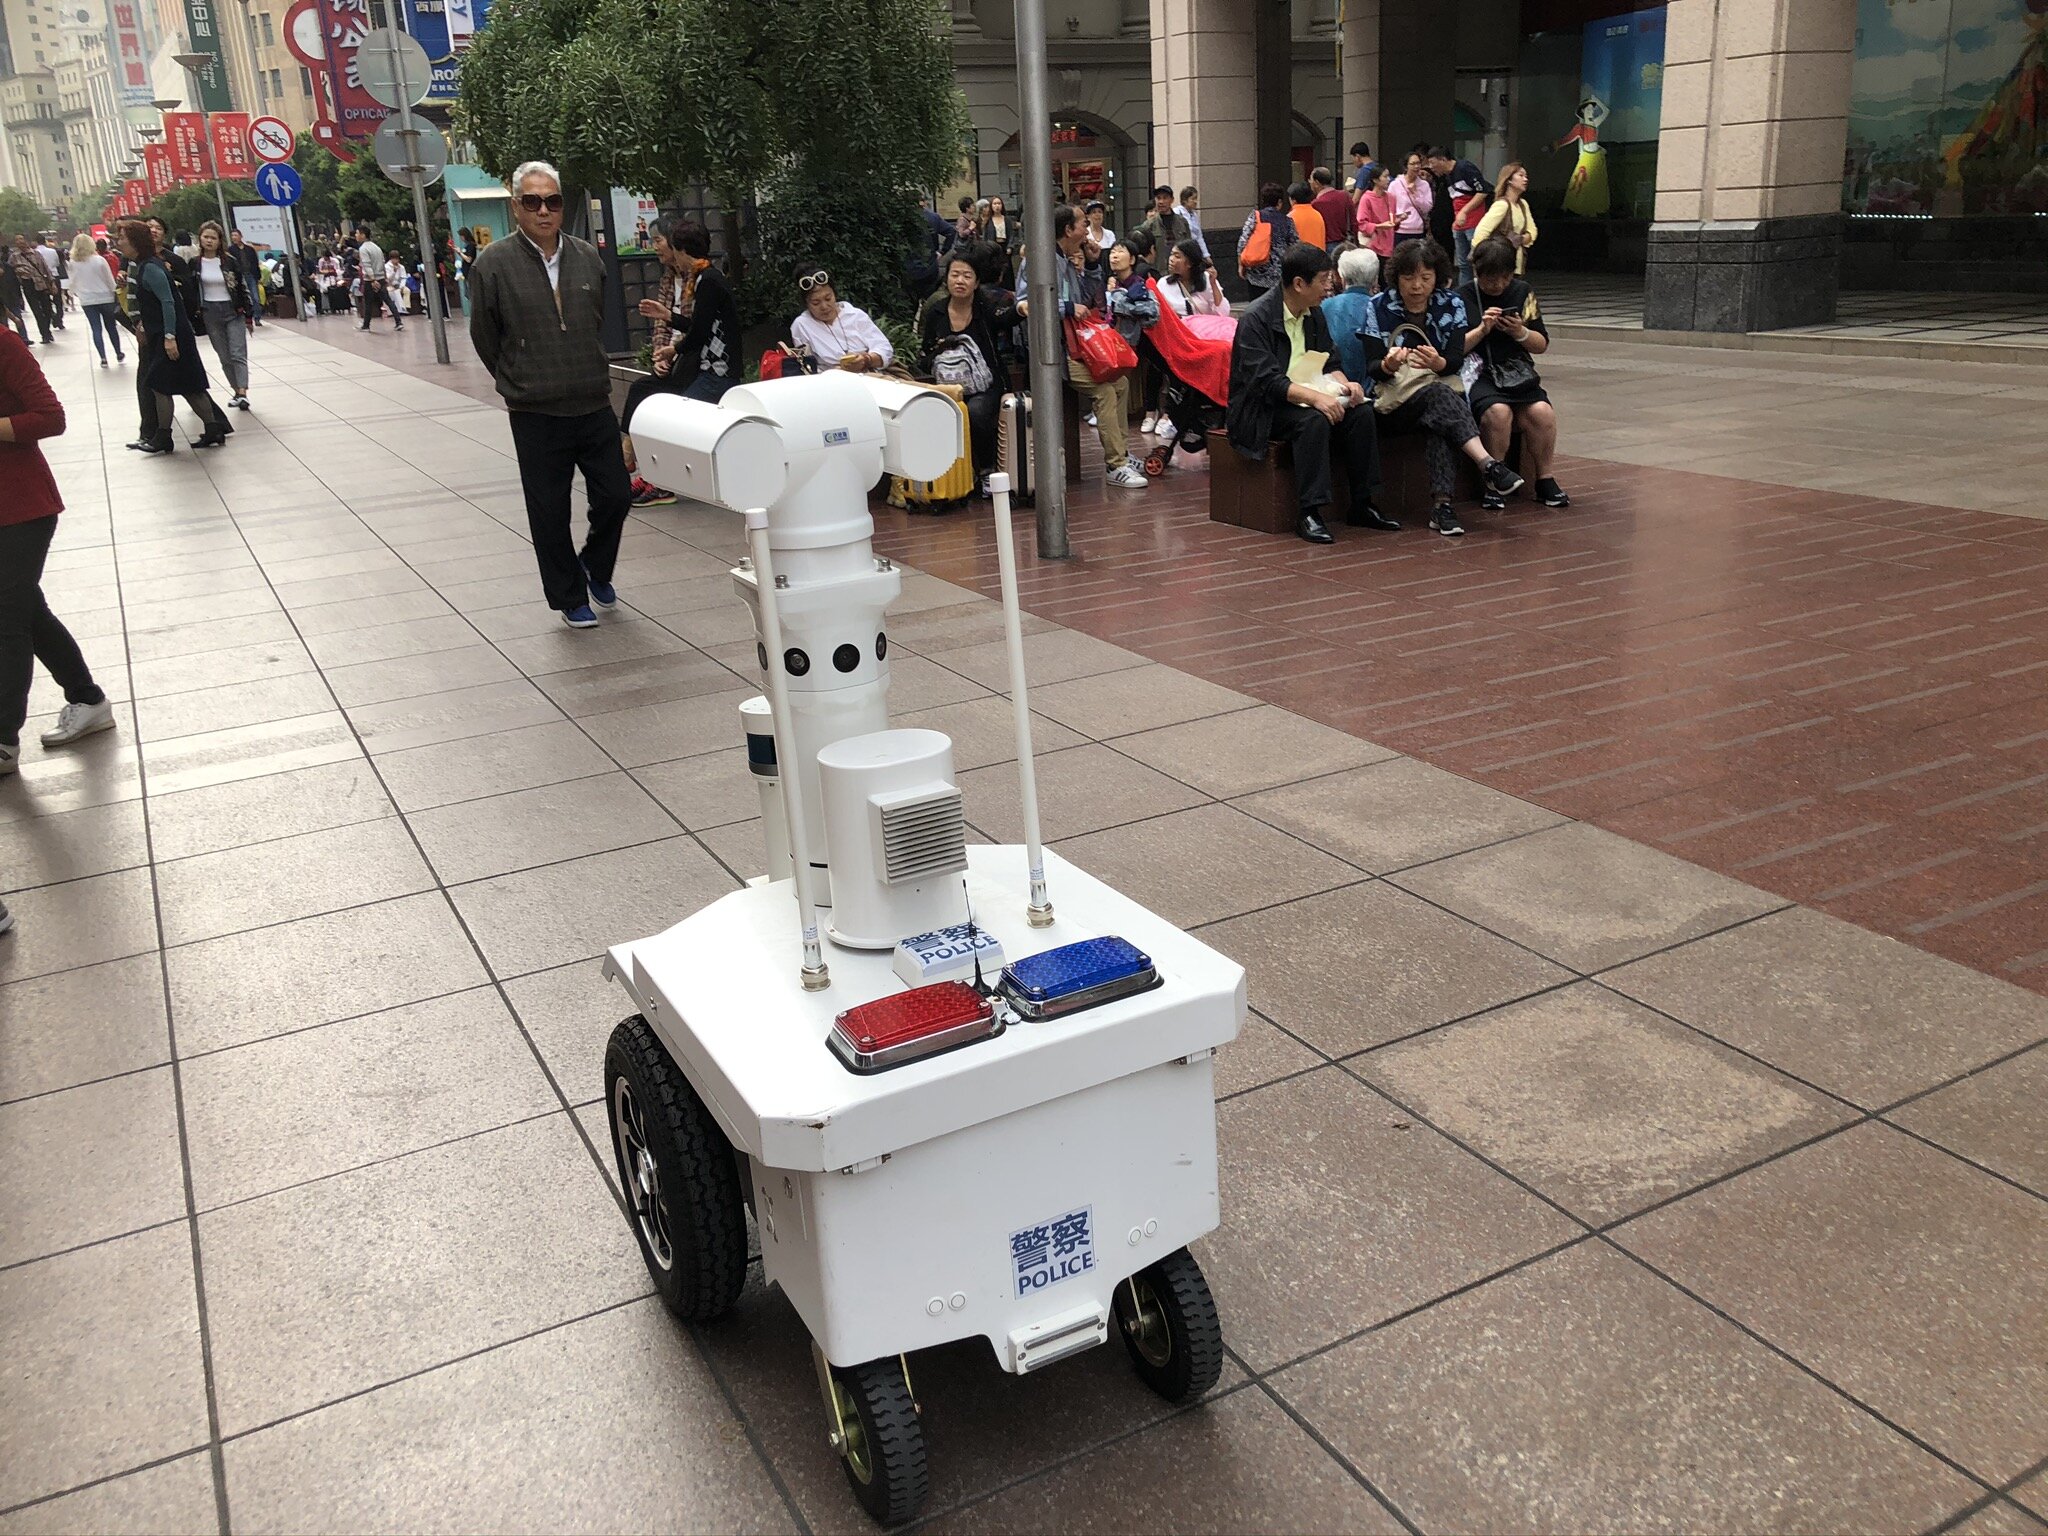  A robotic police patrols the streets 